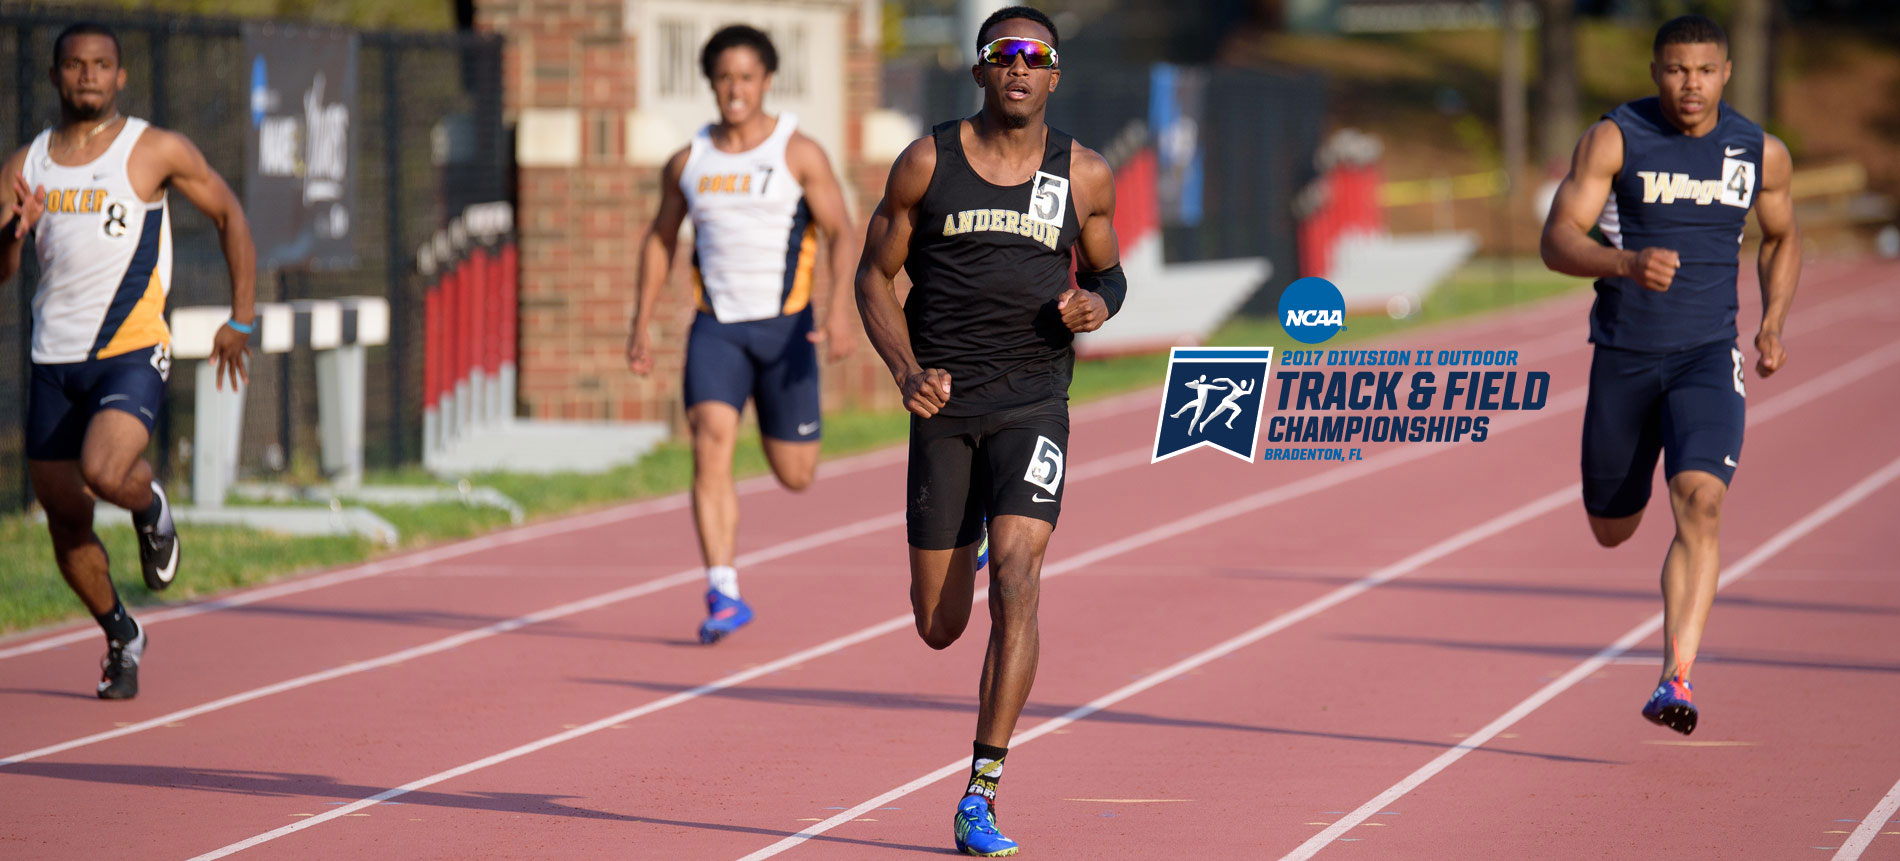 Burton Earns All-America Honors; Qualifies for 200m Finals at NCAA Outdoor Track & Field Championships